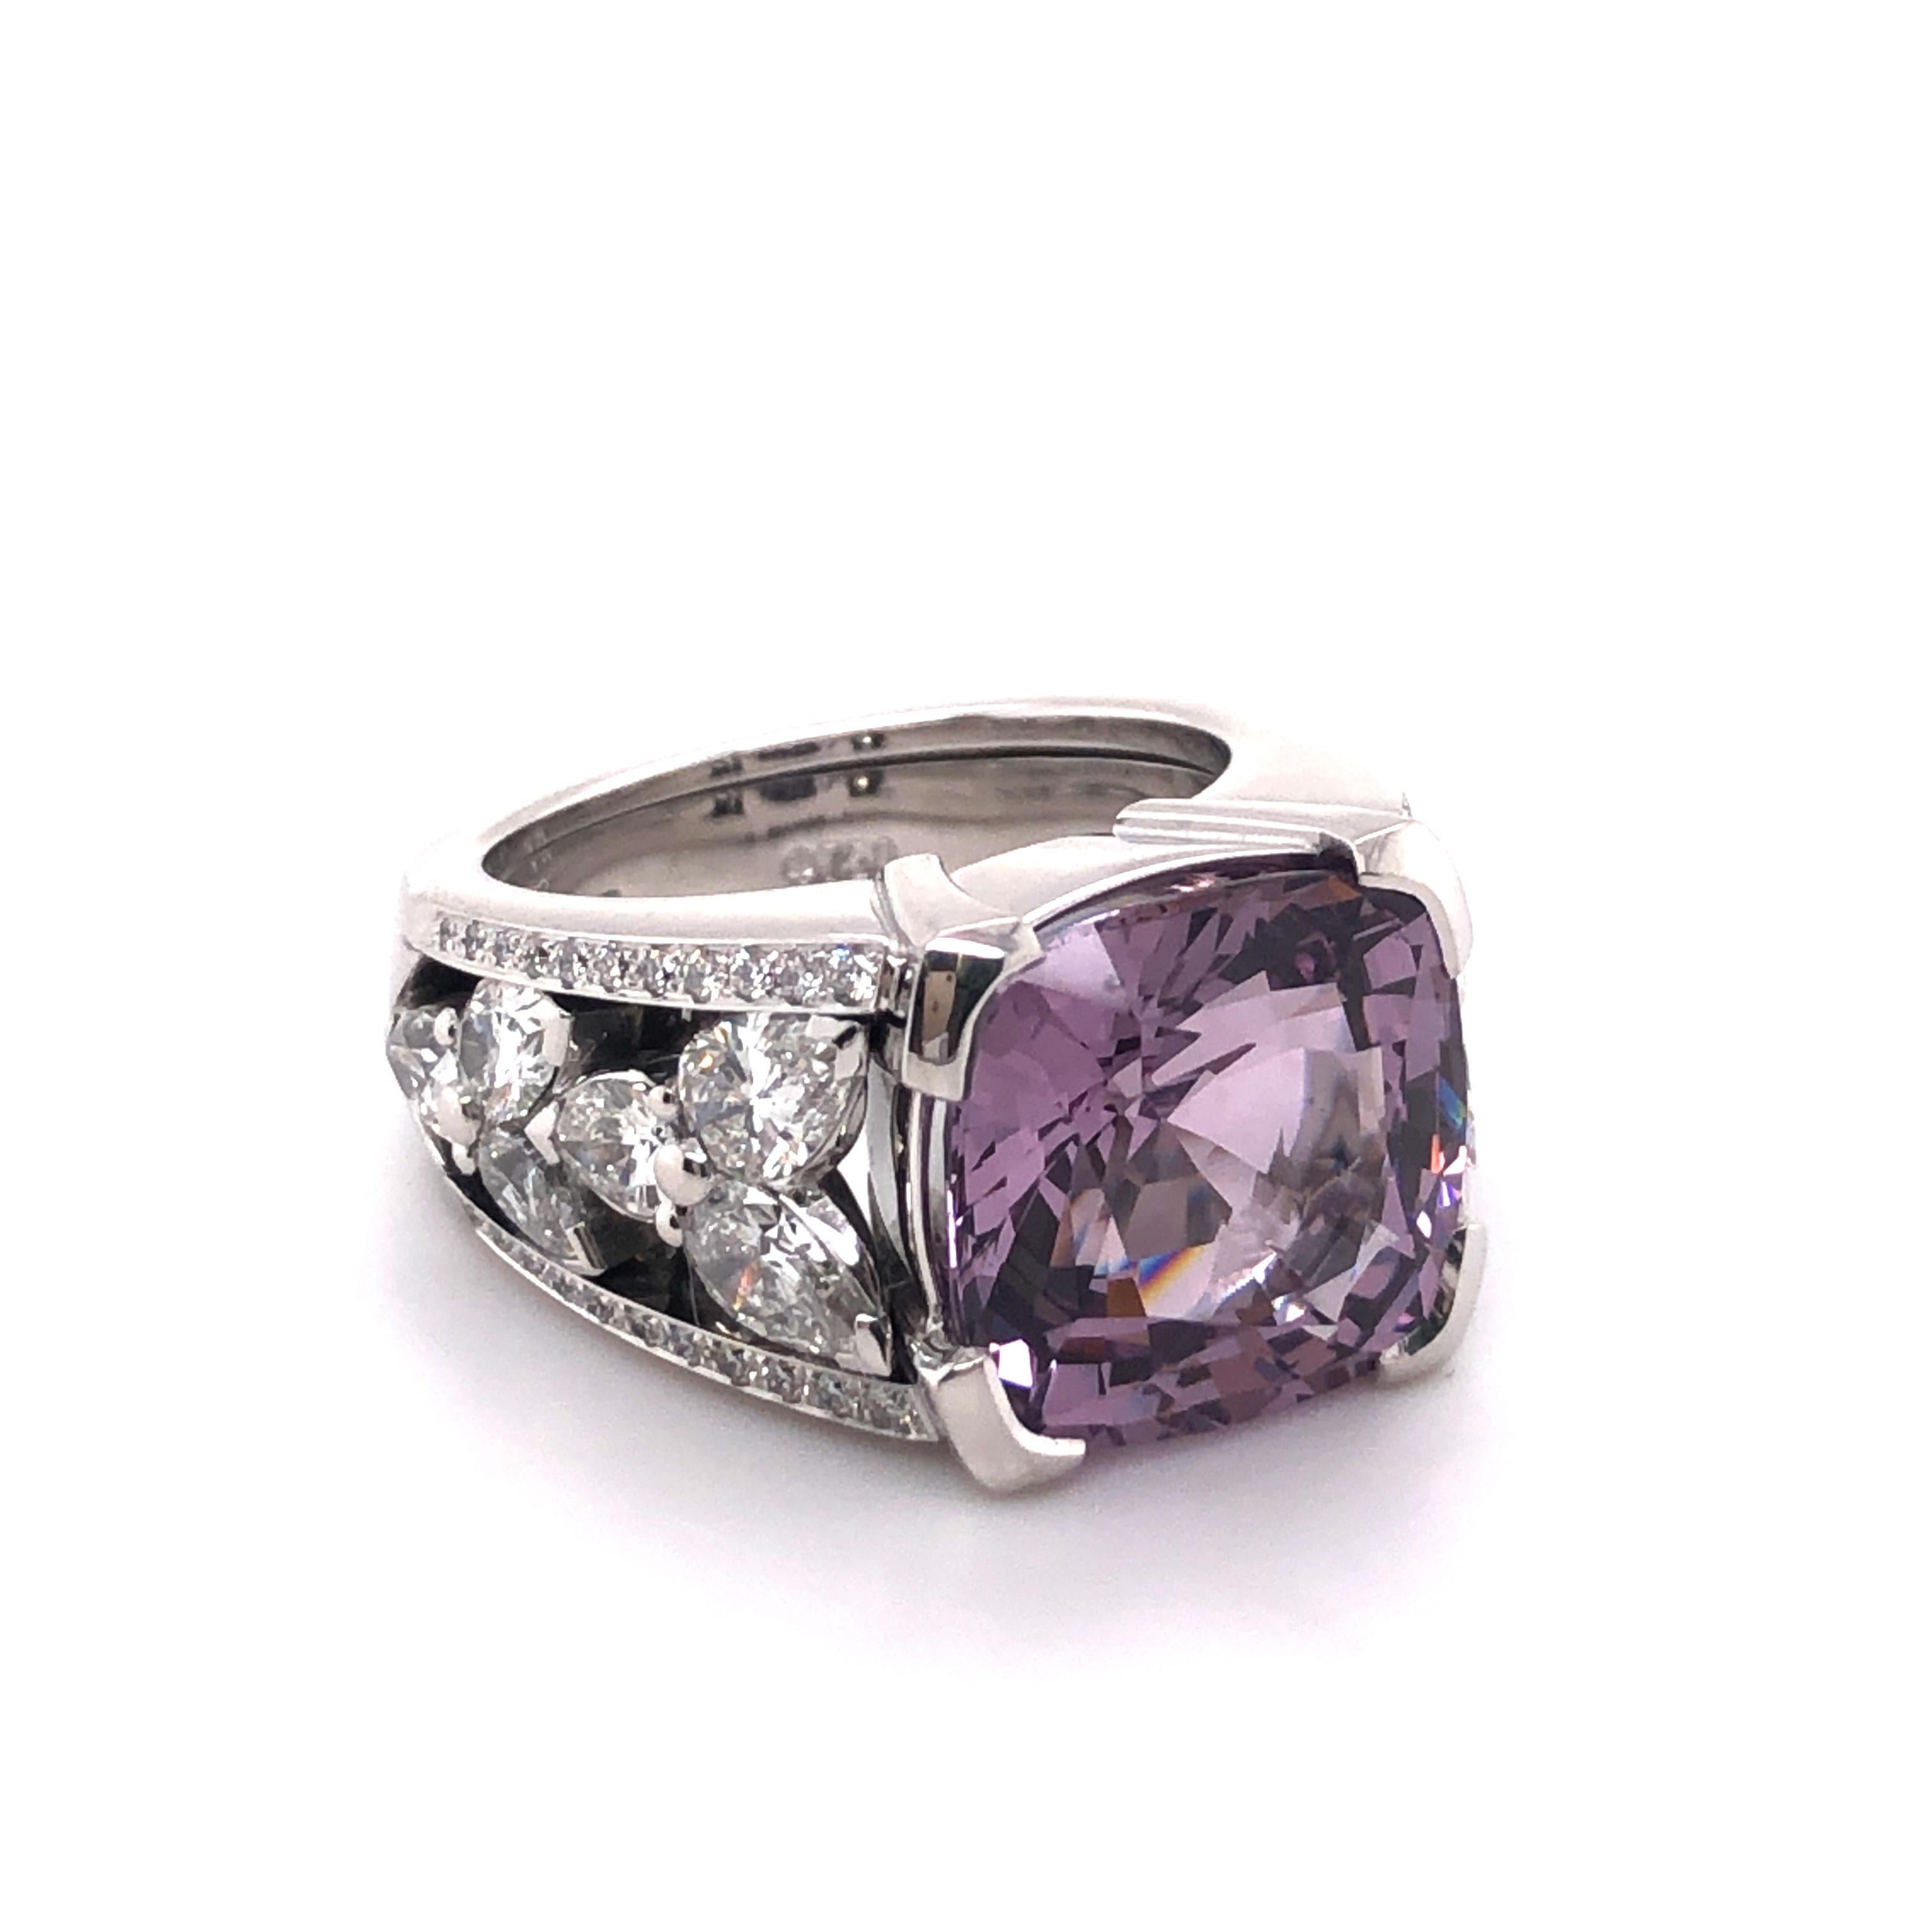 Cushion Cut Certified 8.90 Ct Violet Burmese Spinel and Diamond Ring in 18 Karat White Gold For Sale